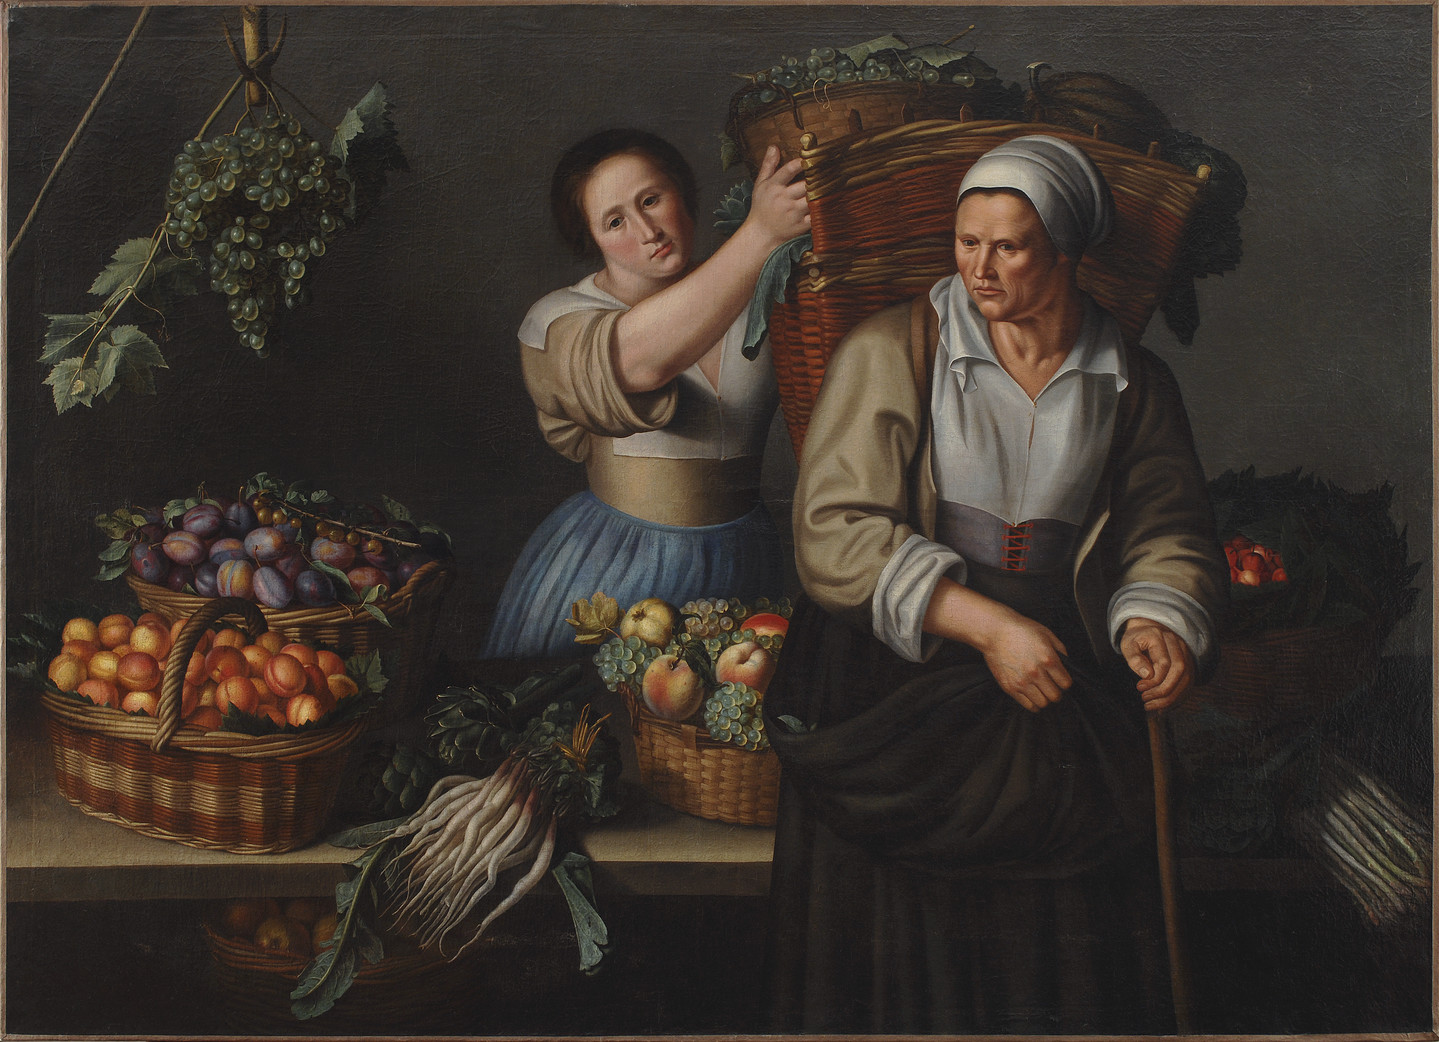 Two women are surrounded by baskets of grapes and other produce. They are both light-skinned and wearing old-fashioned attire with head wraps and full skirts, stand on either side of a table, as the younger one places a bin of grapes into a large basket on the other’s back.